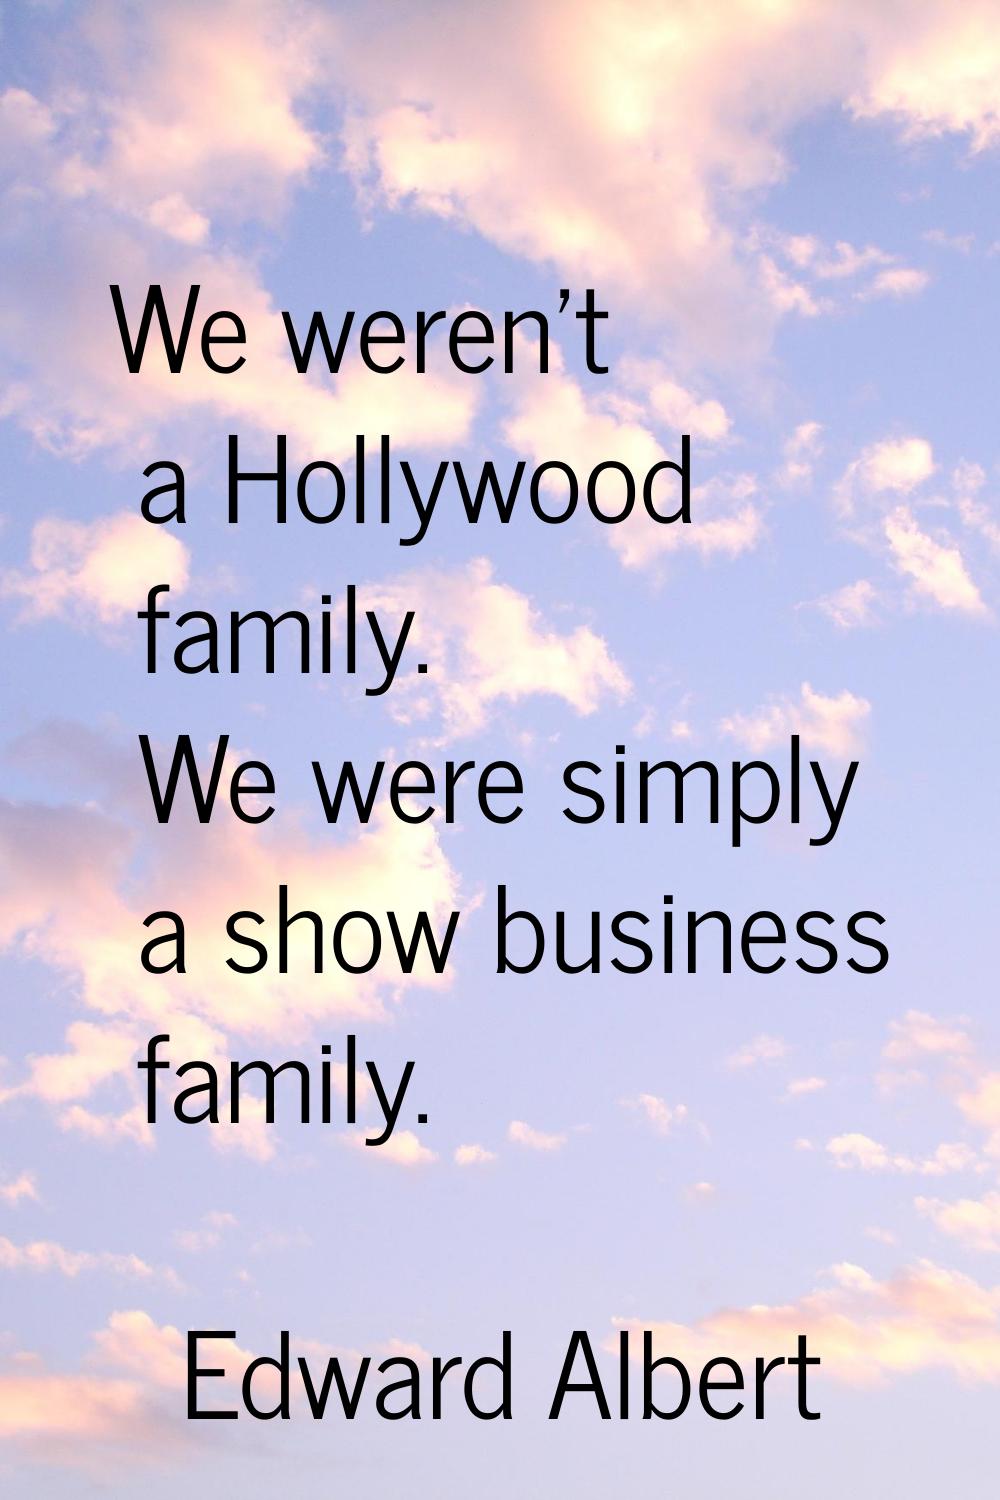 We weren't a Hollywood family. We were simply a show business family.